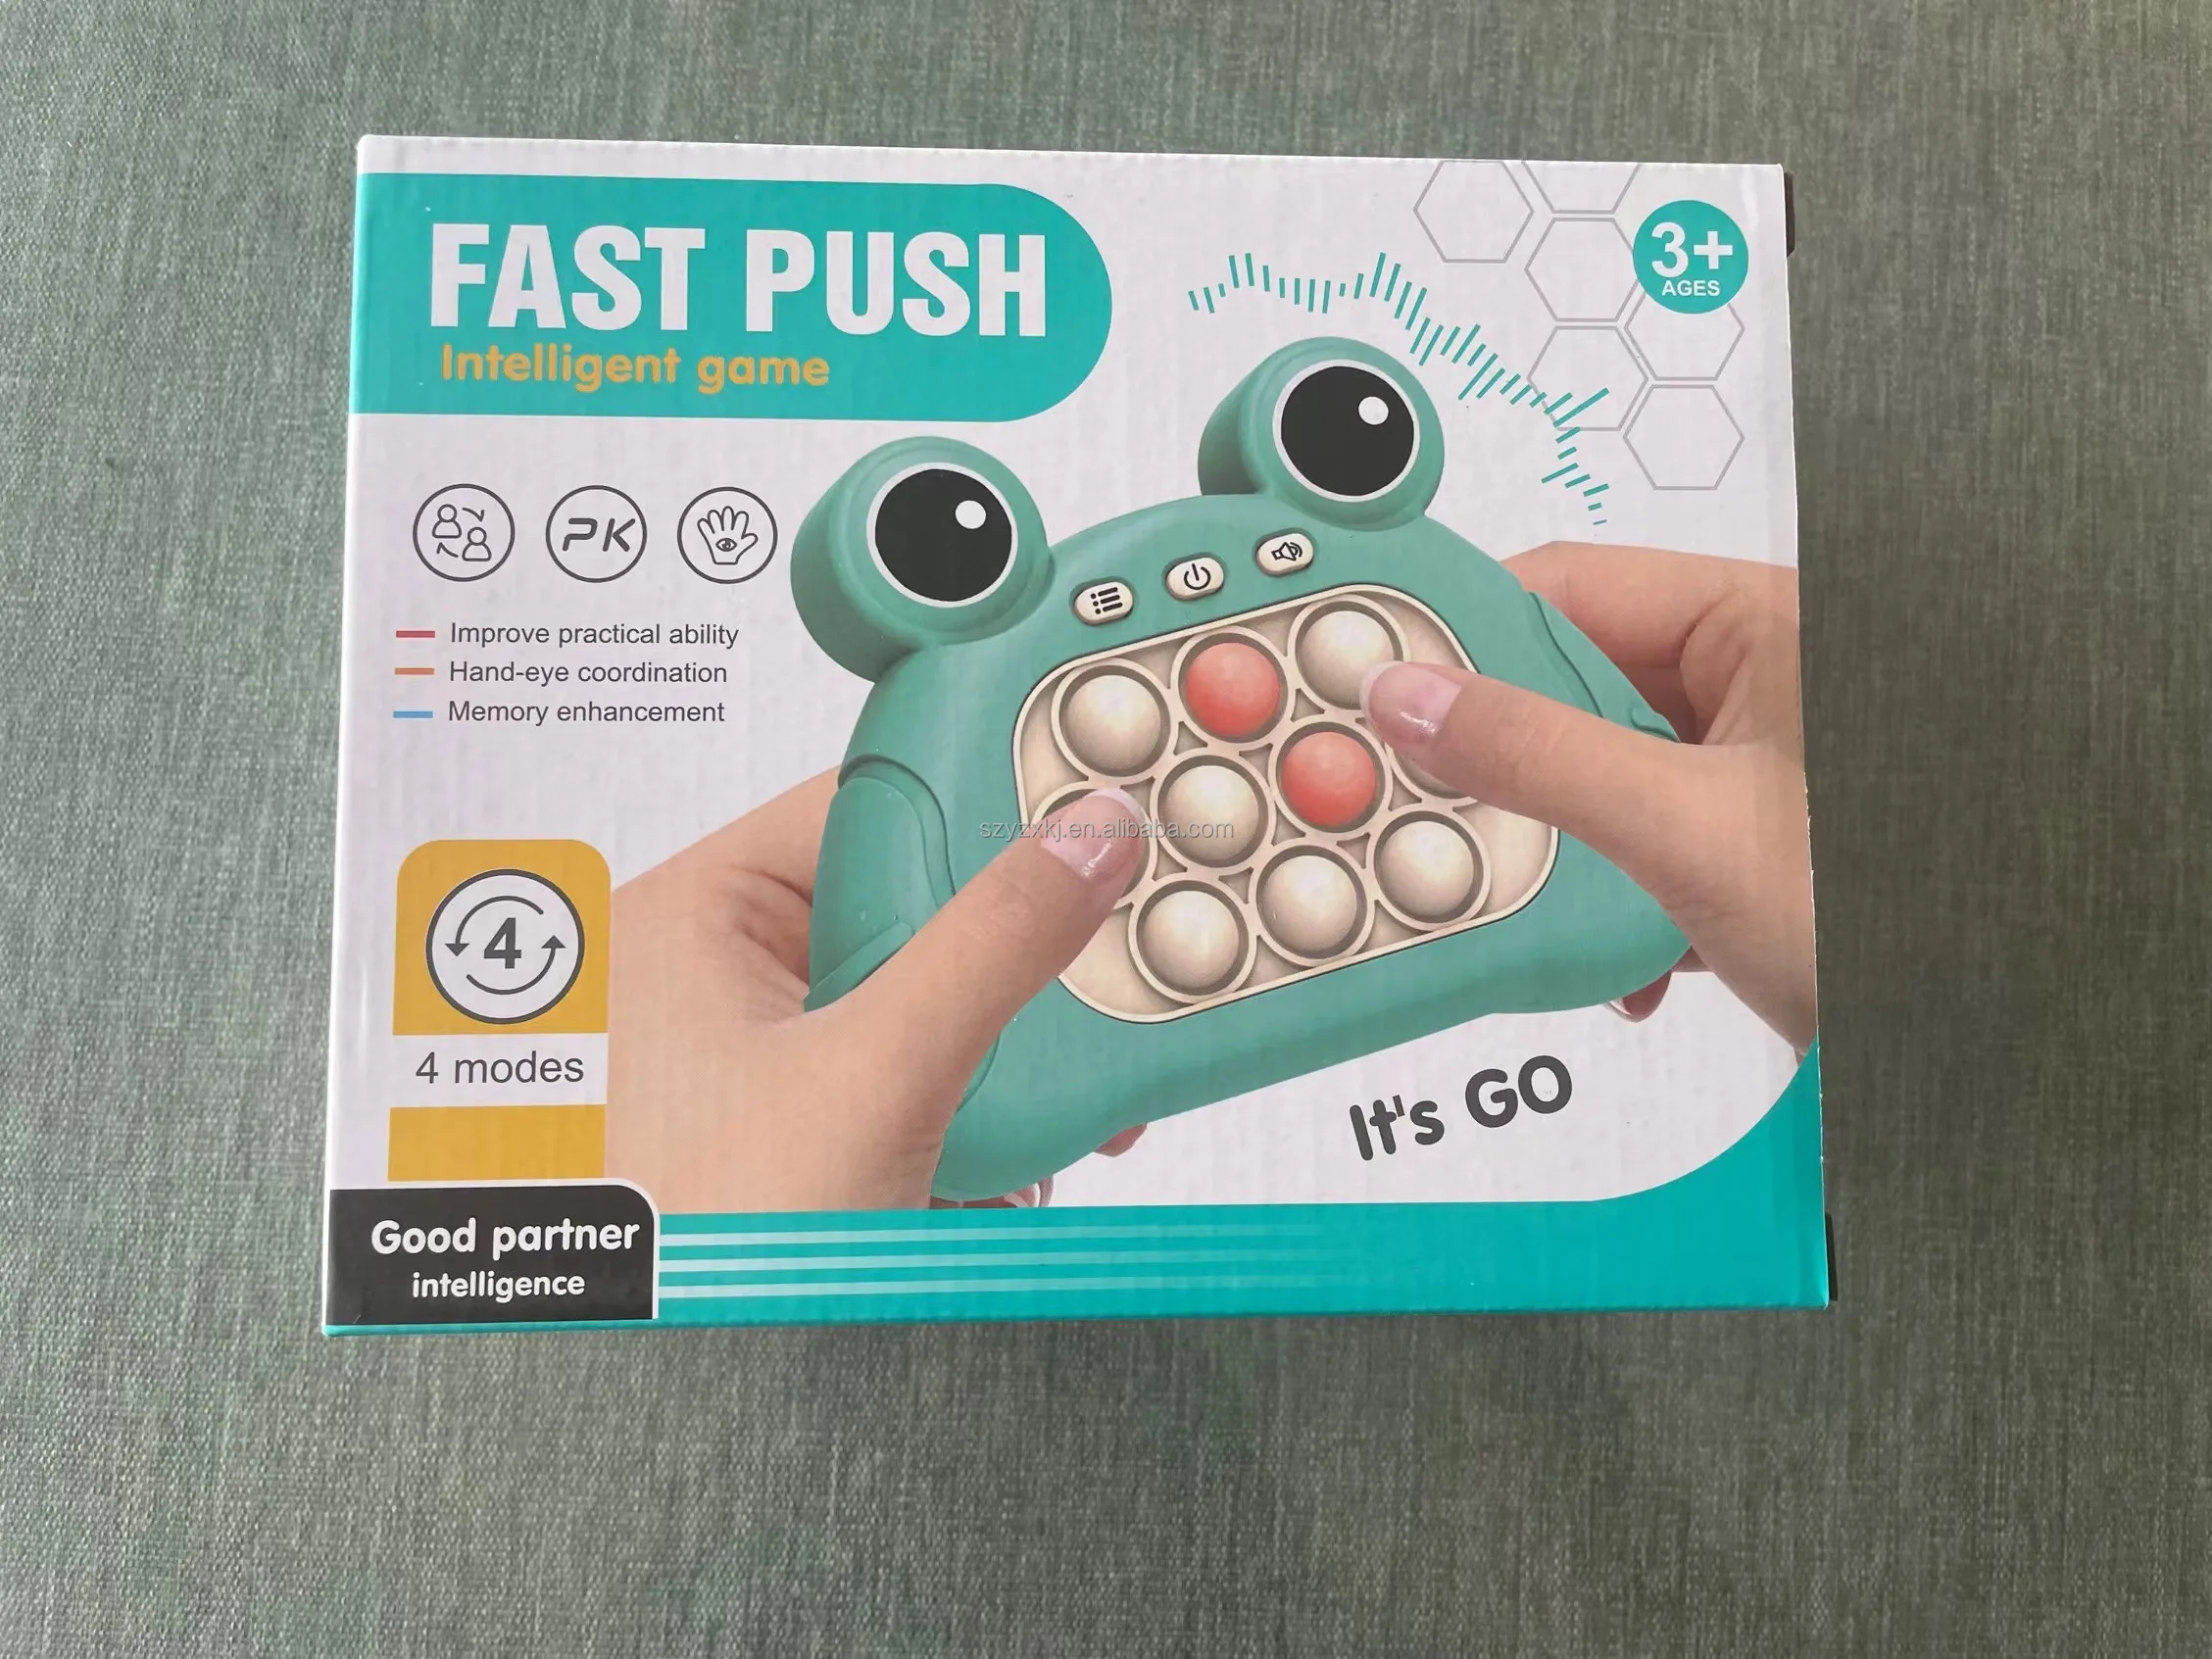  Quick Push Console with Instant Sound Feedback